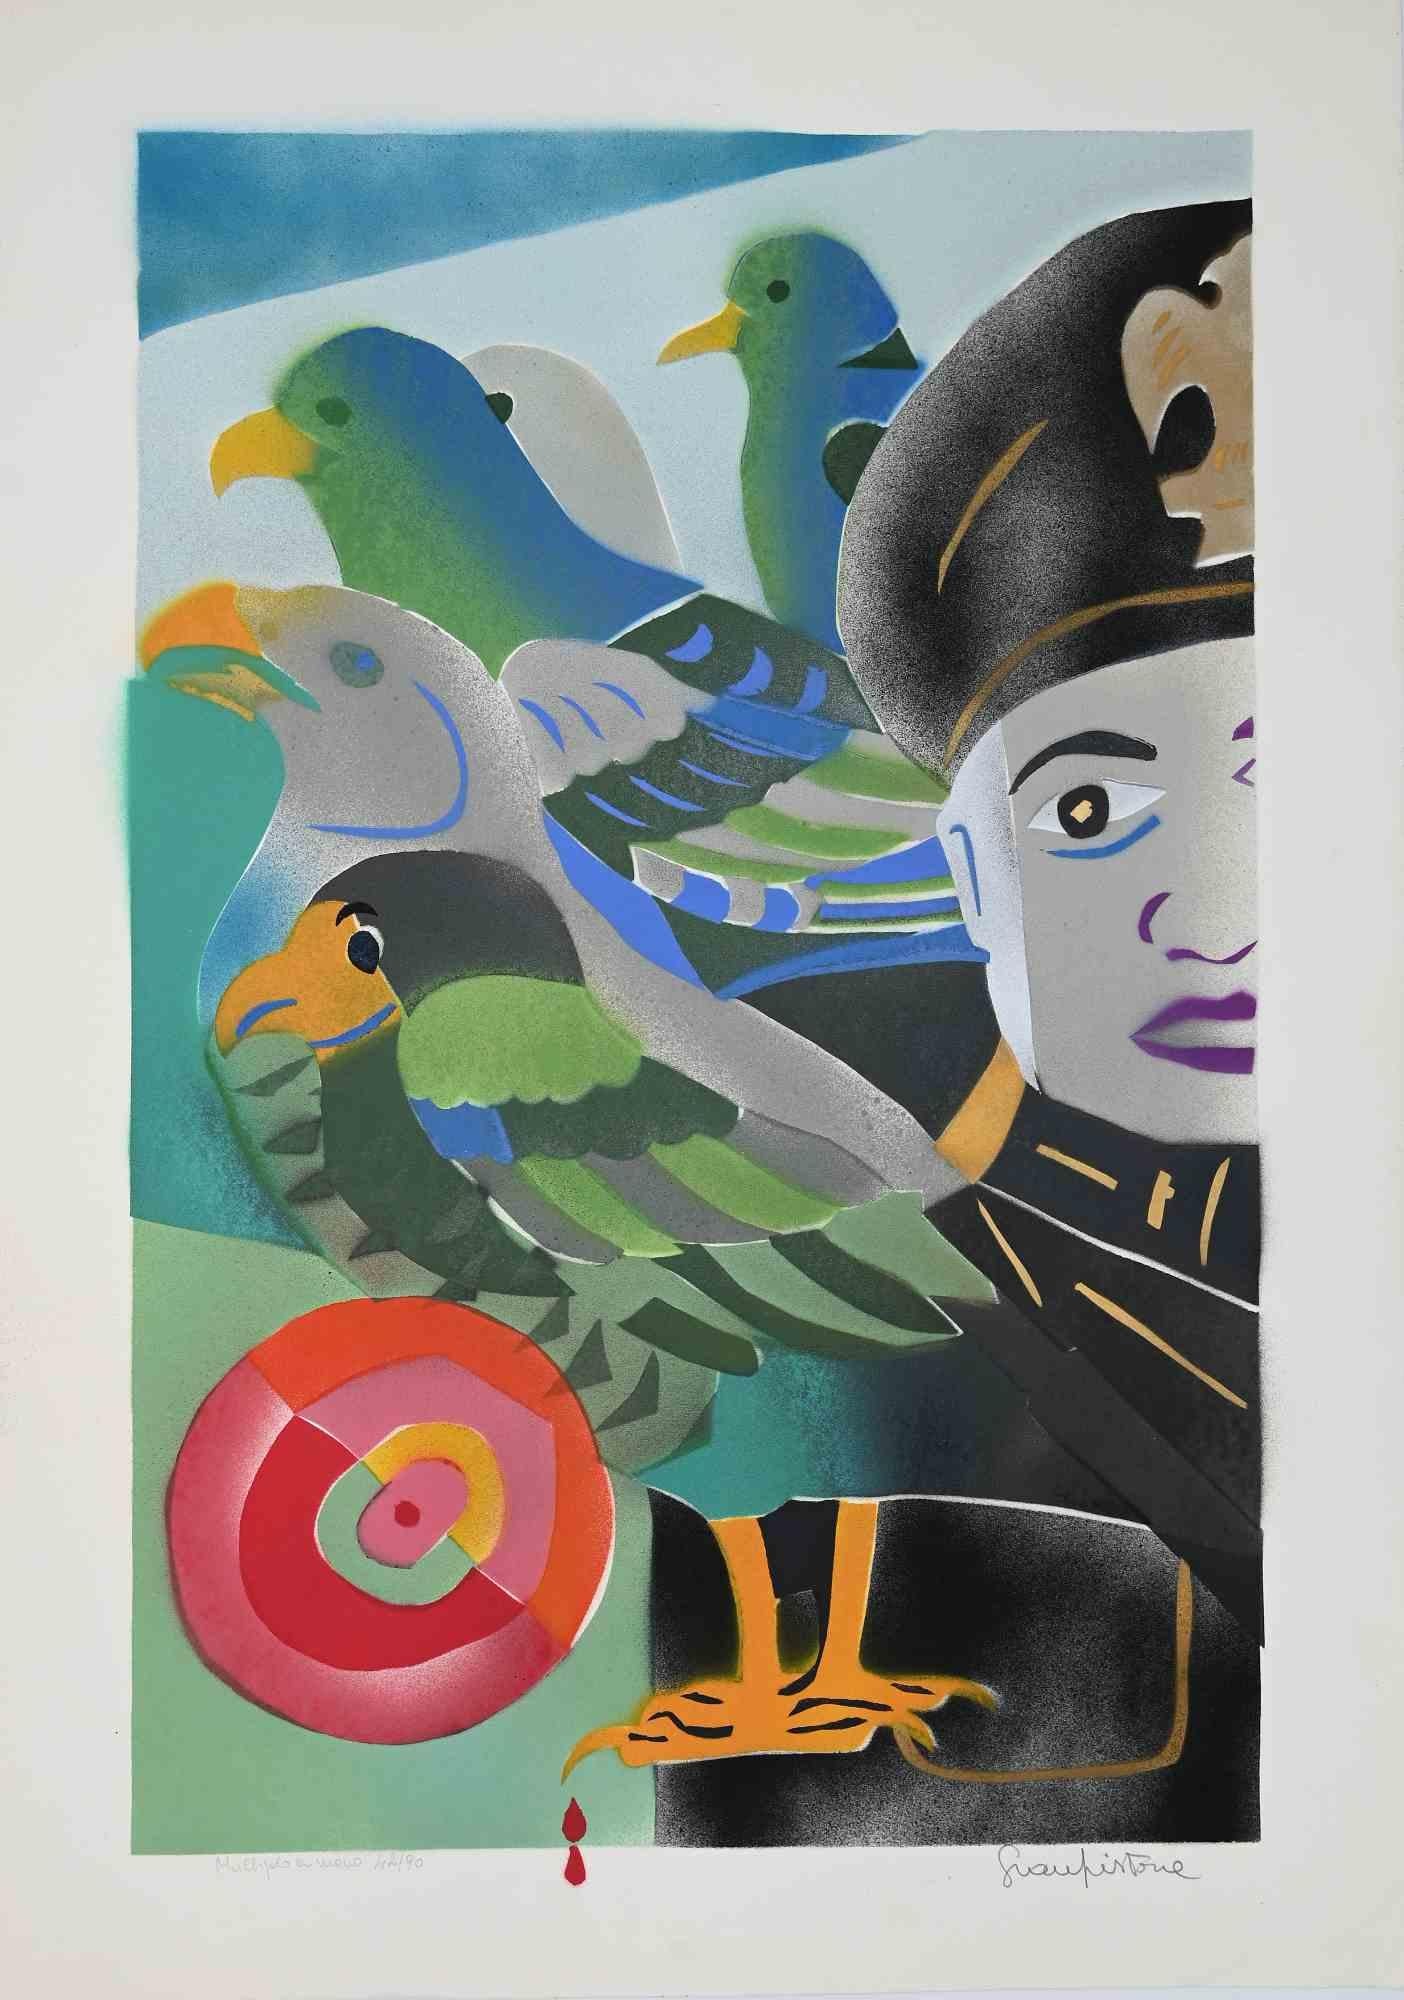 The General and the Birds is a beautiful colored screen print retouched by hand realized by Gianpistone in the 1970s.

Hand-signed in pencil on the lower right margin. Numbered on the lower left. Edition of 42/90.

On the lower center, "autentico,